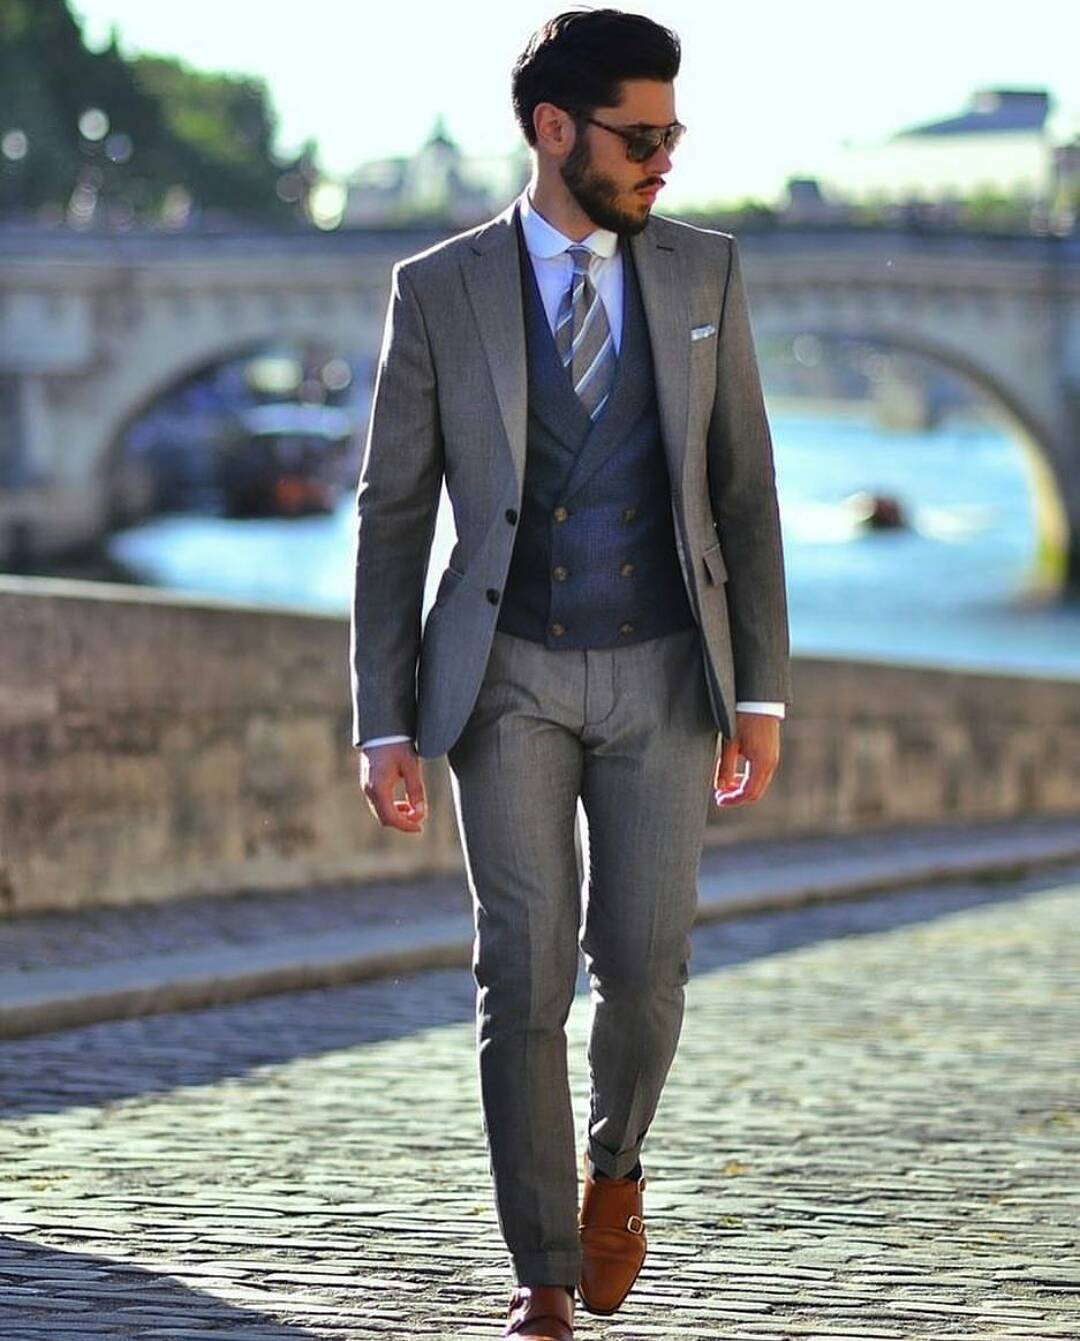 Cocktail Attire For Men - What To Wear ...